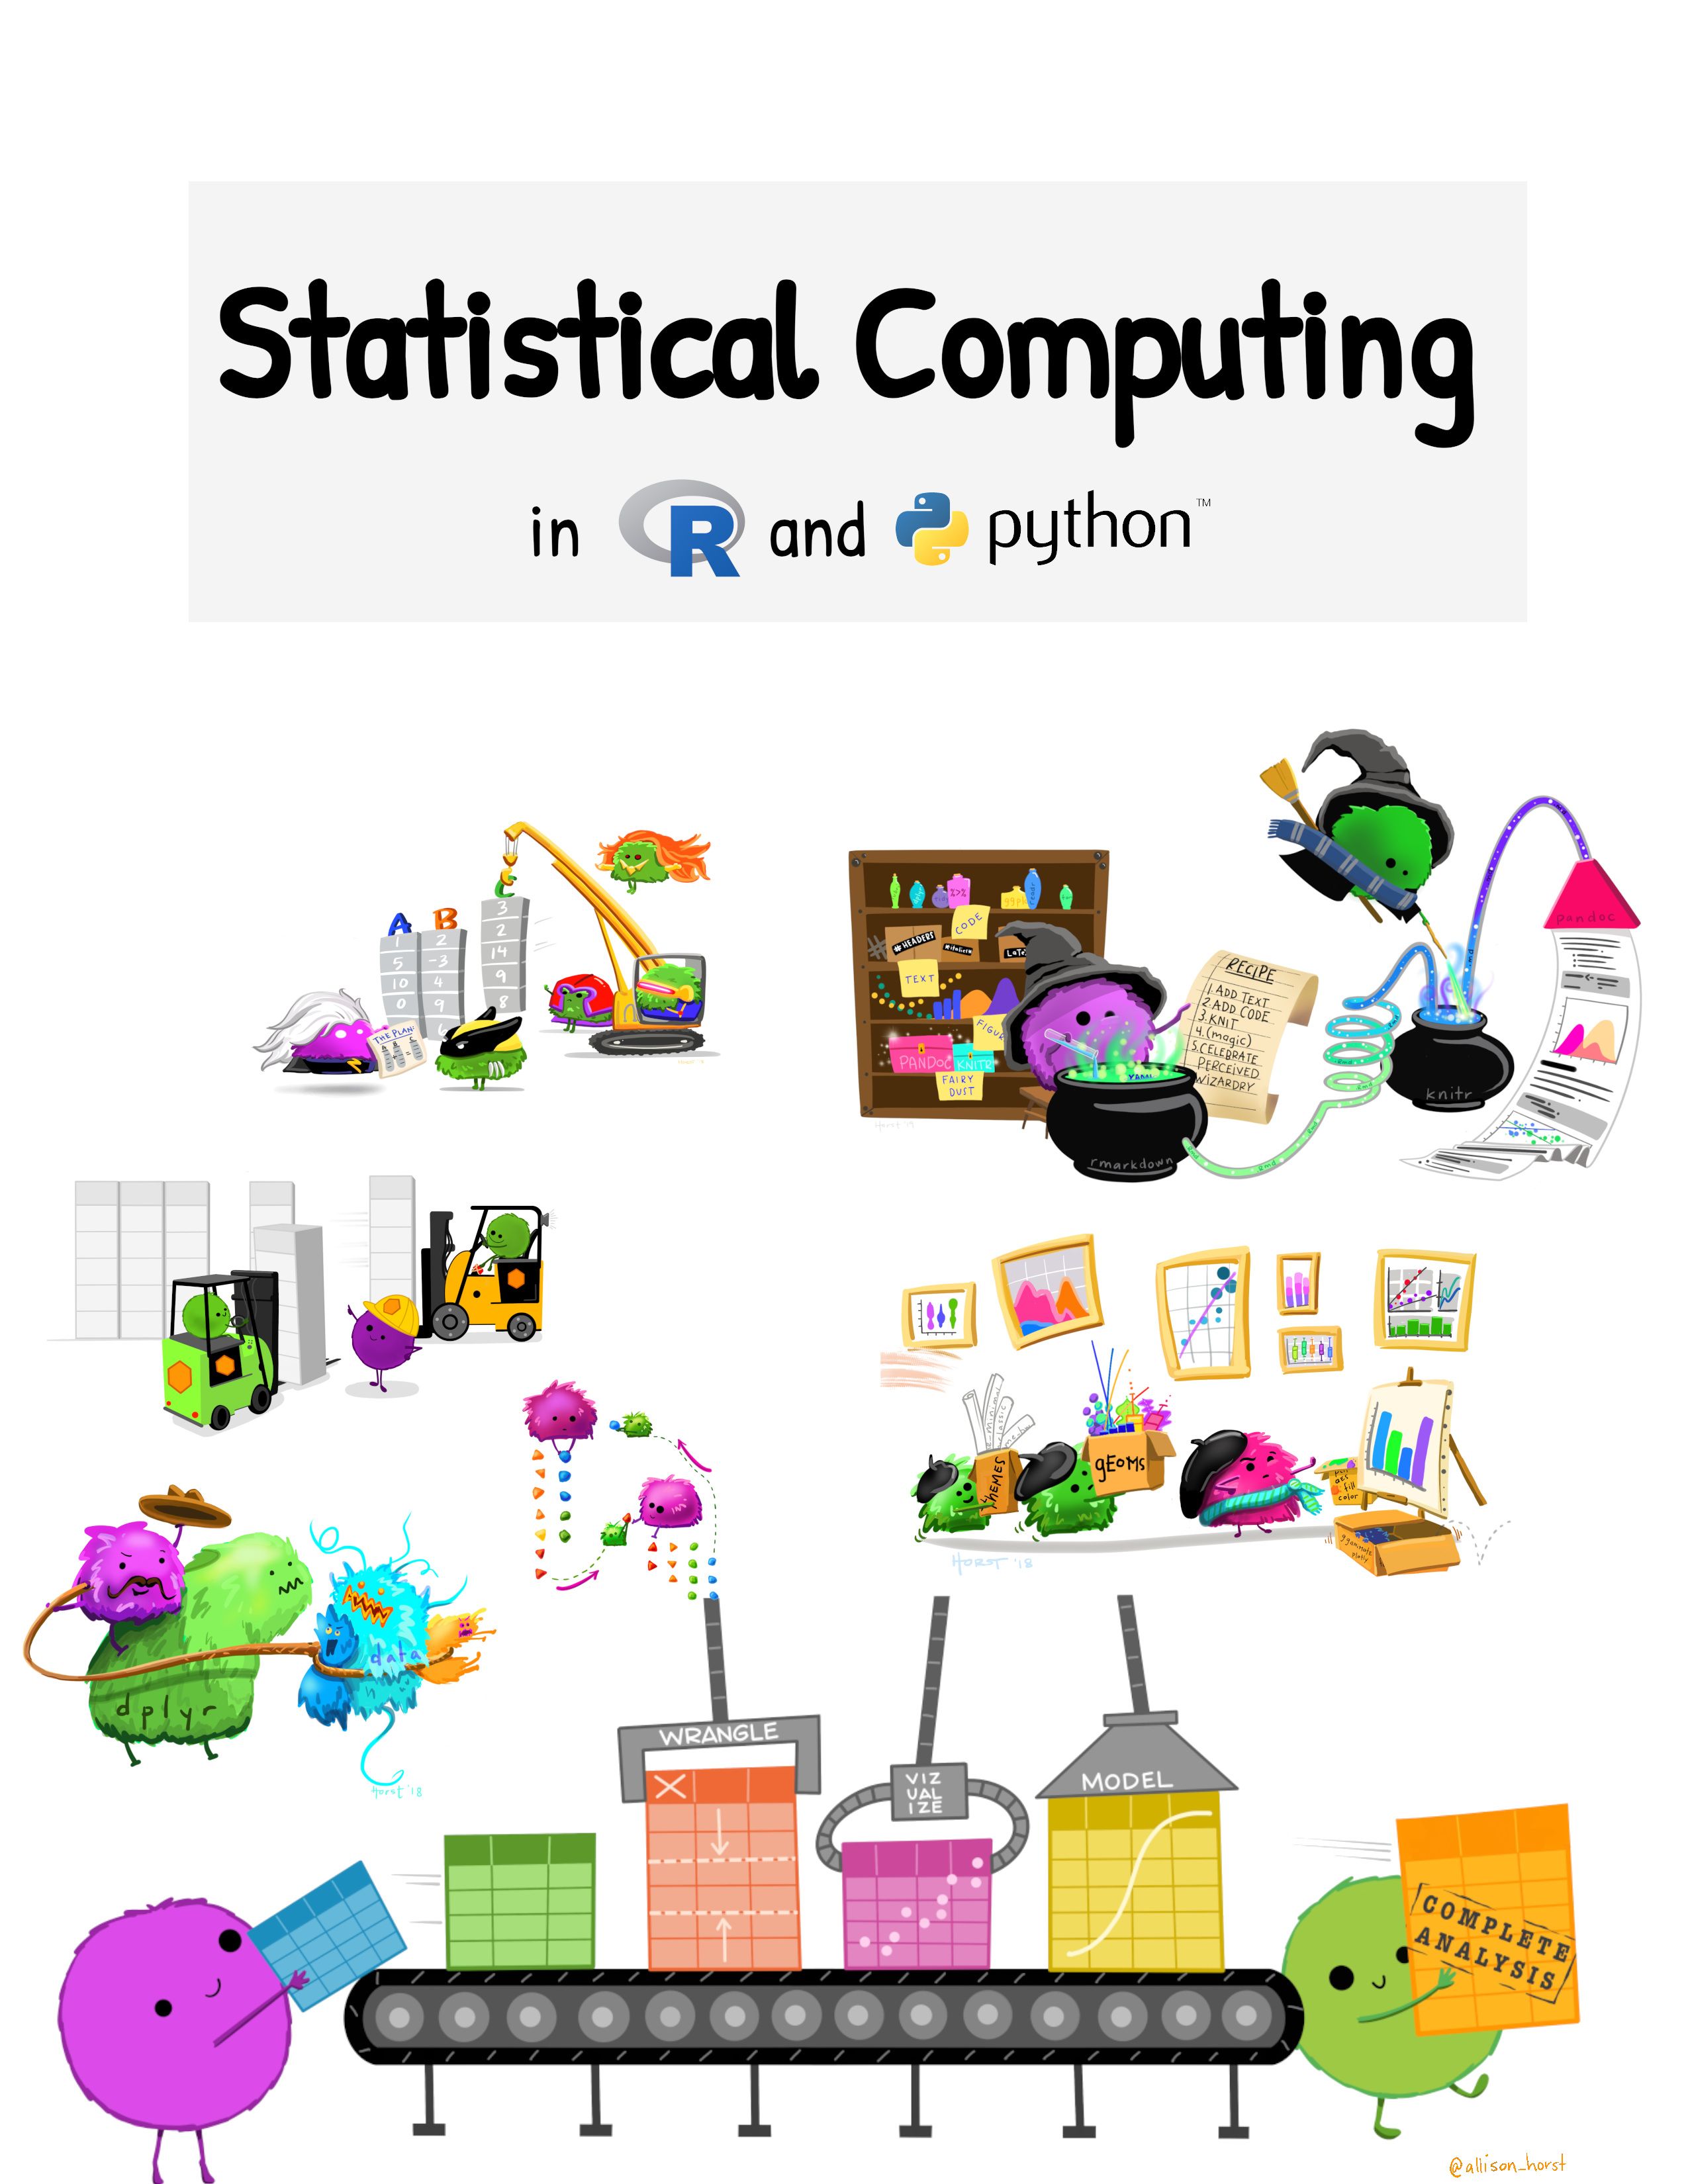 Cover image for Statistical Computing using R and Python. Shows little fuzzball 'monsters' completing data-related tasks such as rearranging data frames, brewing complete documents using markdown, and assembling data analyses by arranging, wrangling, visualizing, and modeling data. Images assembled from a collection of drawings by Allison Horst; used with permission.